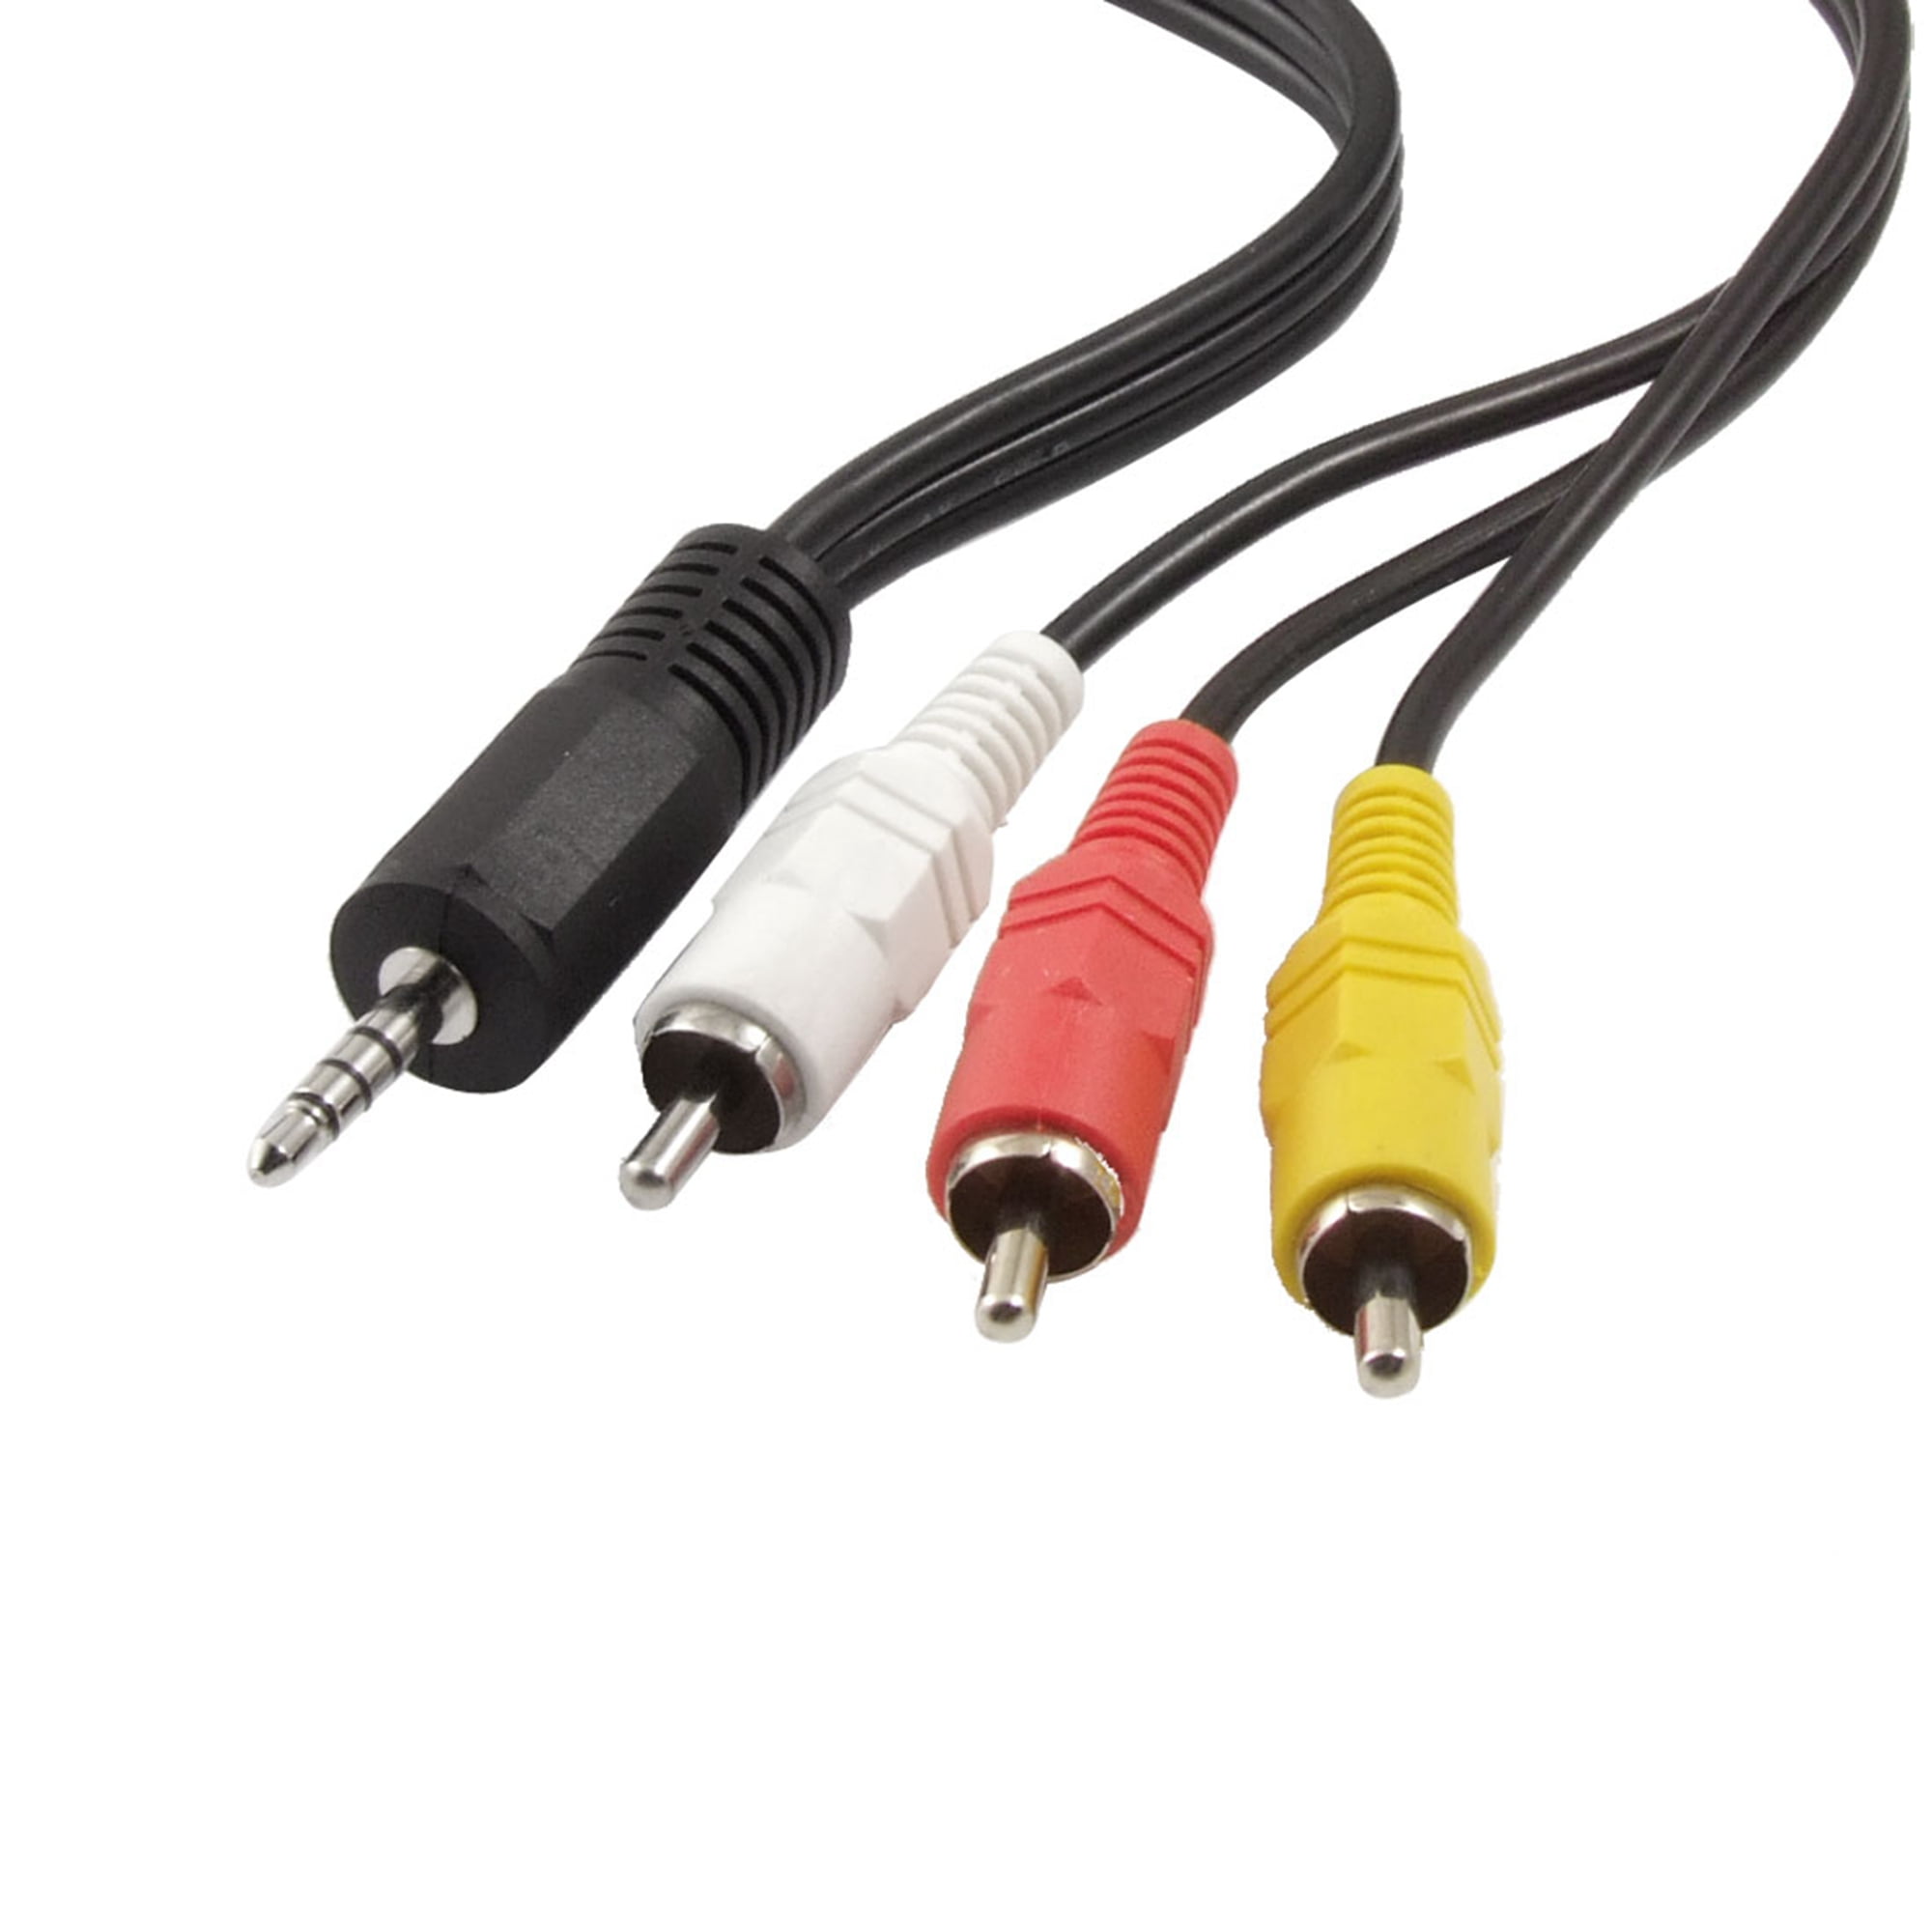 3 BAND 3.5mm TO 3 PHONO & SCART ADAPTER RCA CAMCORDER PLAYBACK LEAD 